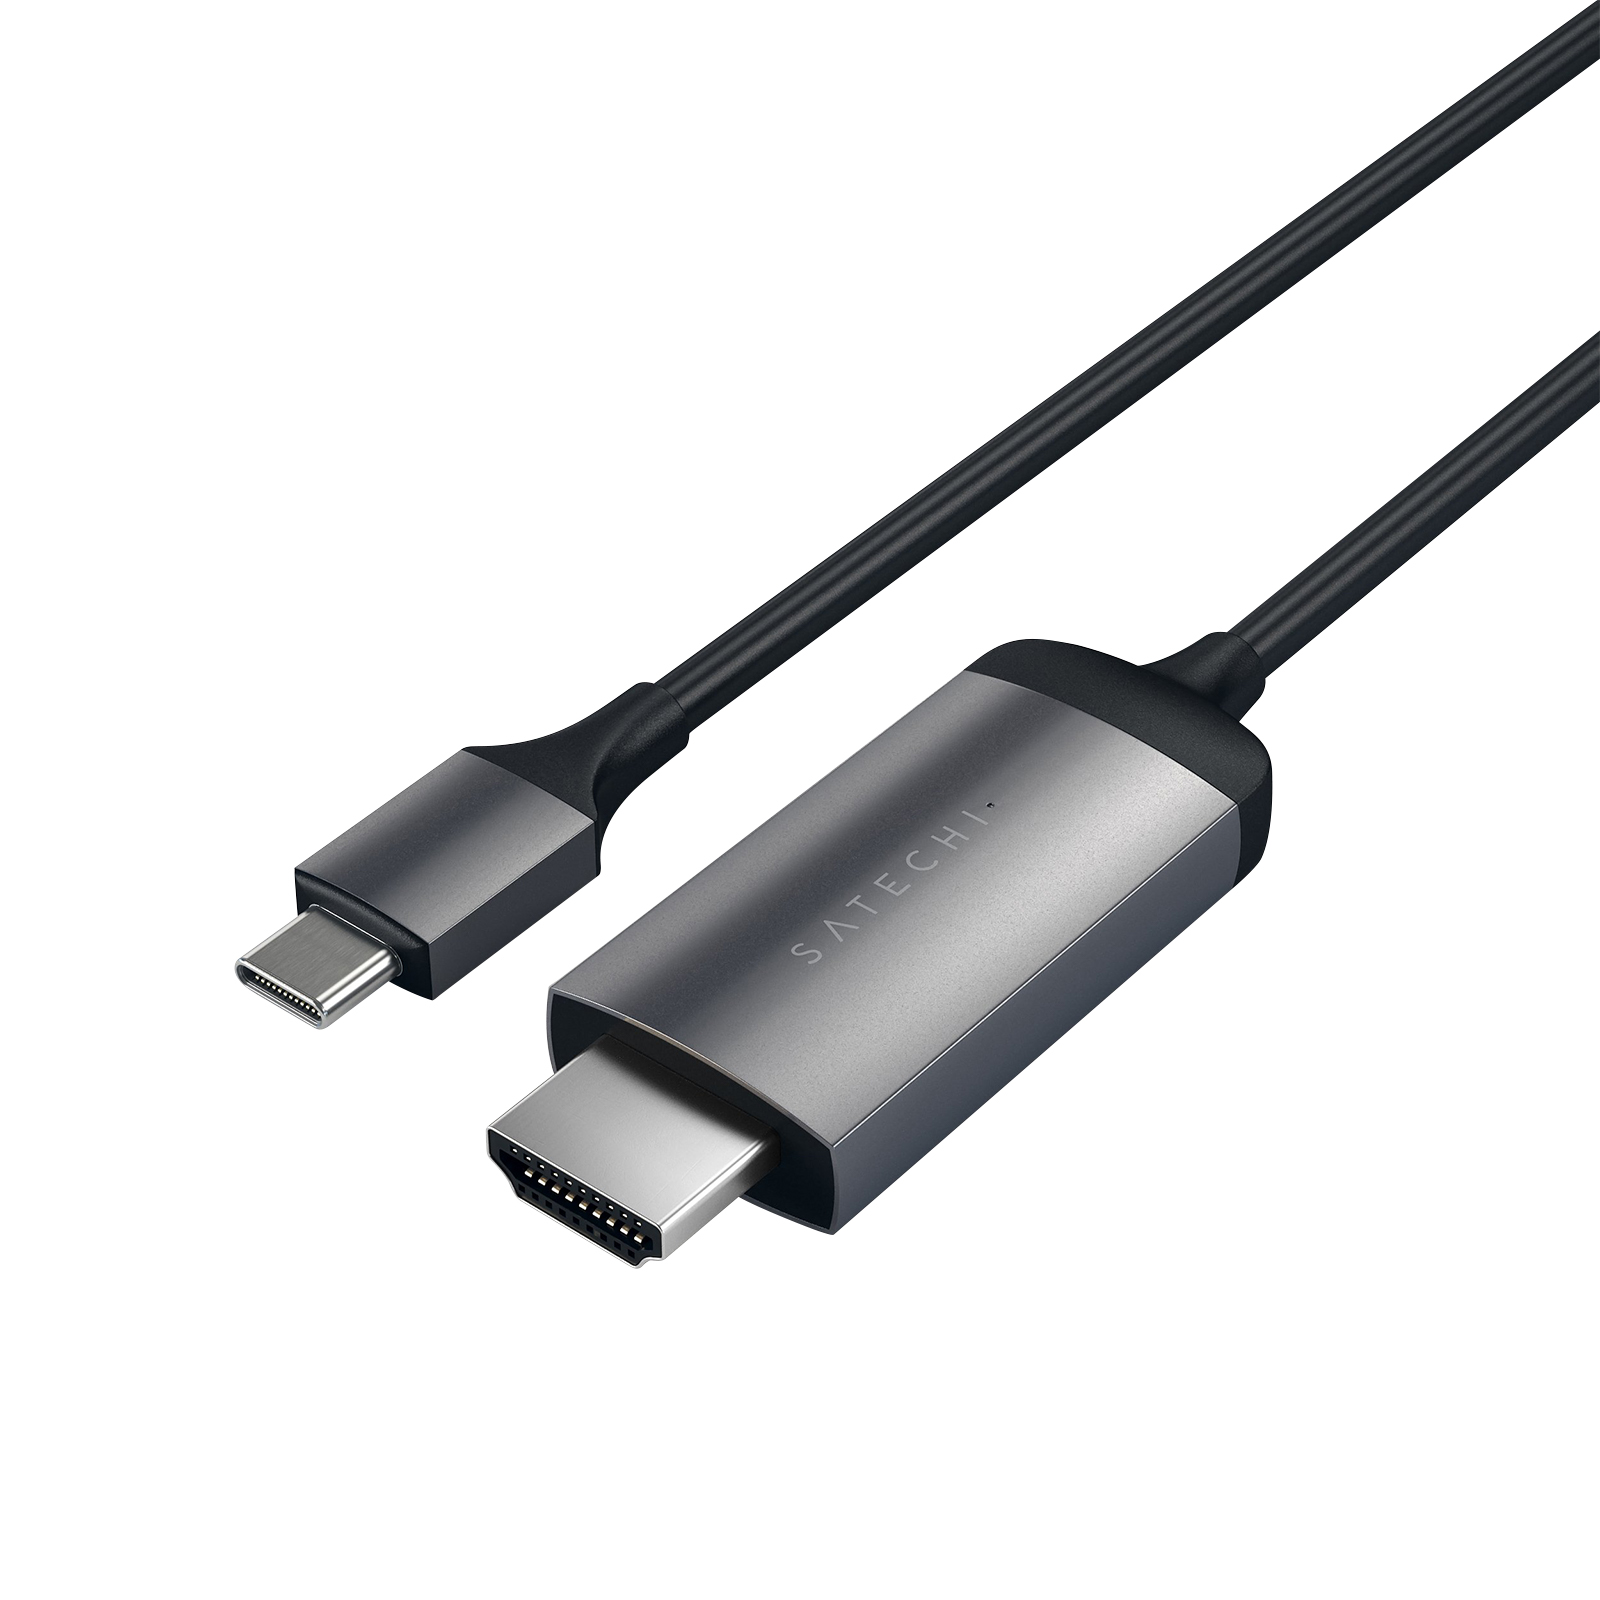 SPACE CABLE SATECHI TYPE-C 4K TO GREY ST-CHDMIM Kabel, Dunkelgrau HDMI